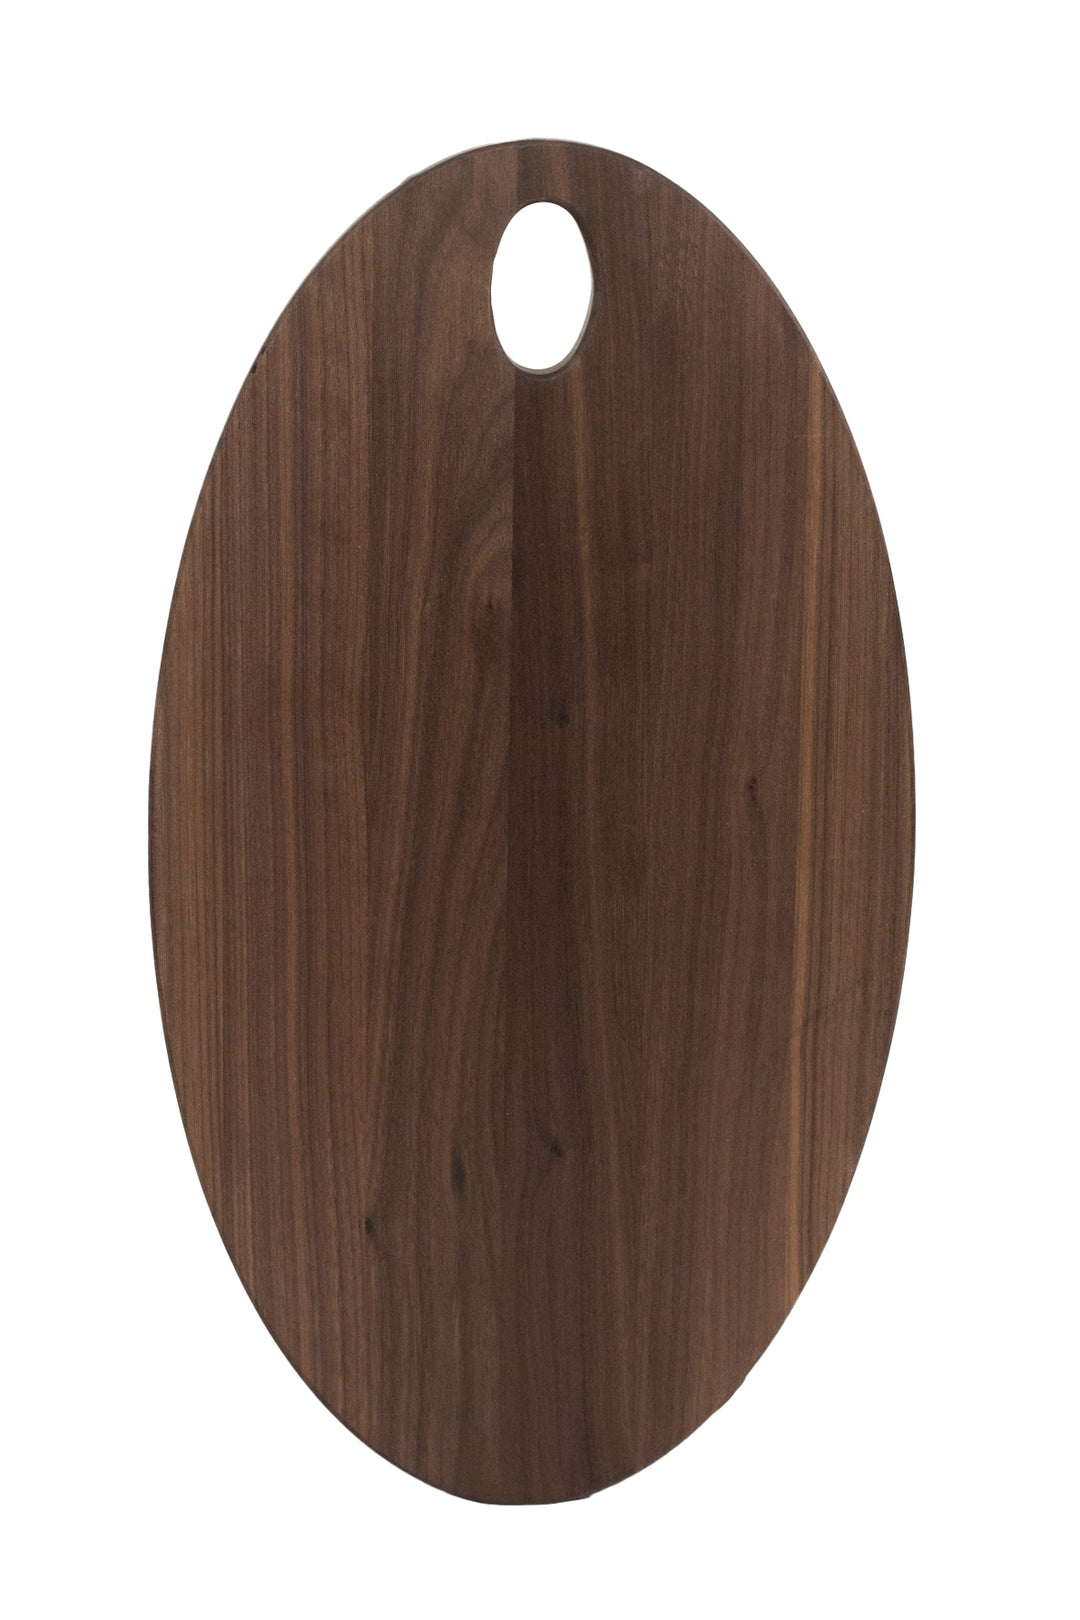 Oval Walnut Serving Board with Cut Out Handle